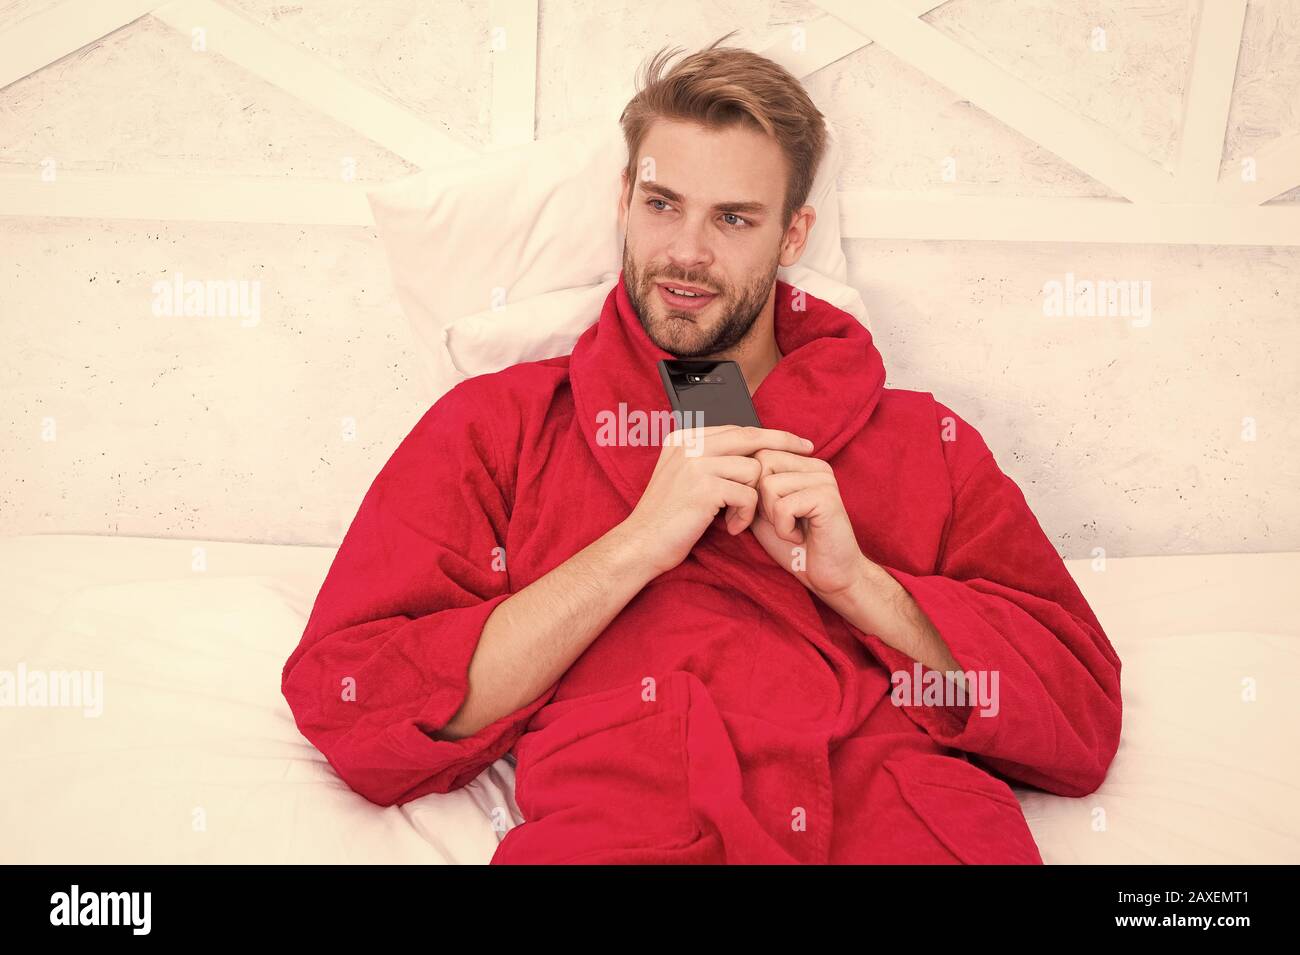 Creating his own blog. Handsome man making new blog post from smartphone. Blogger keeping private personal blog in bed. Caucasian guy in bathrobe posting blog on online social network from bedroom. Stock Photo